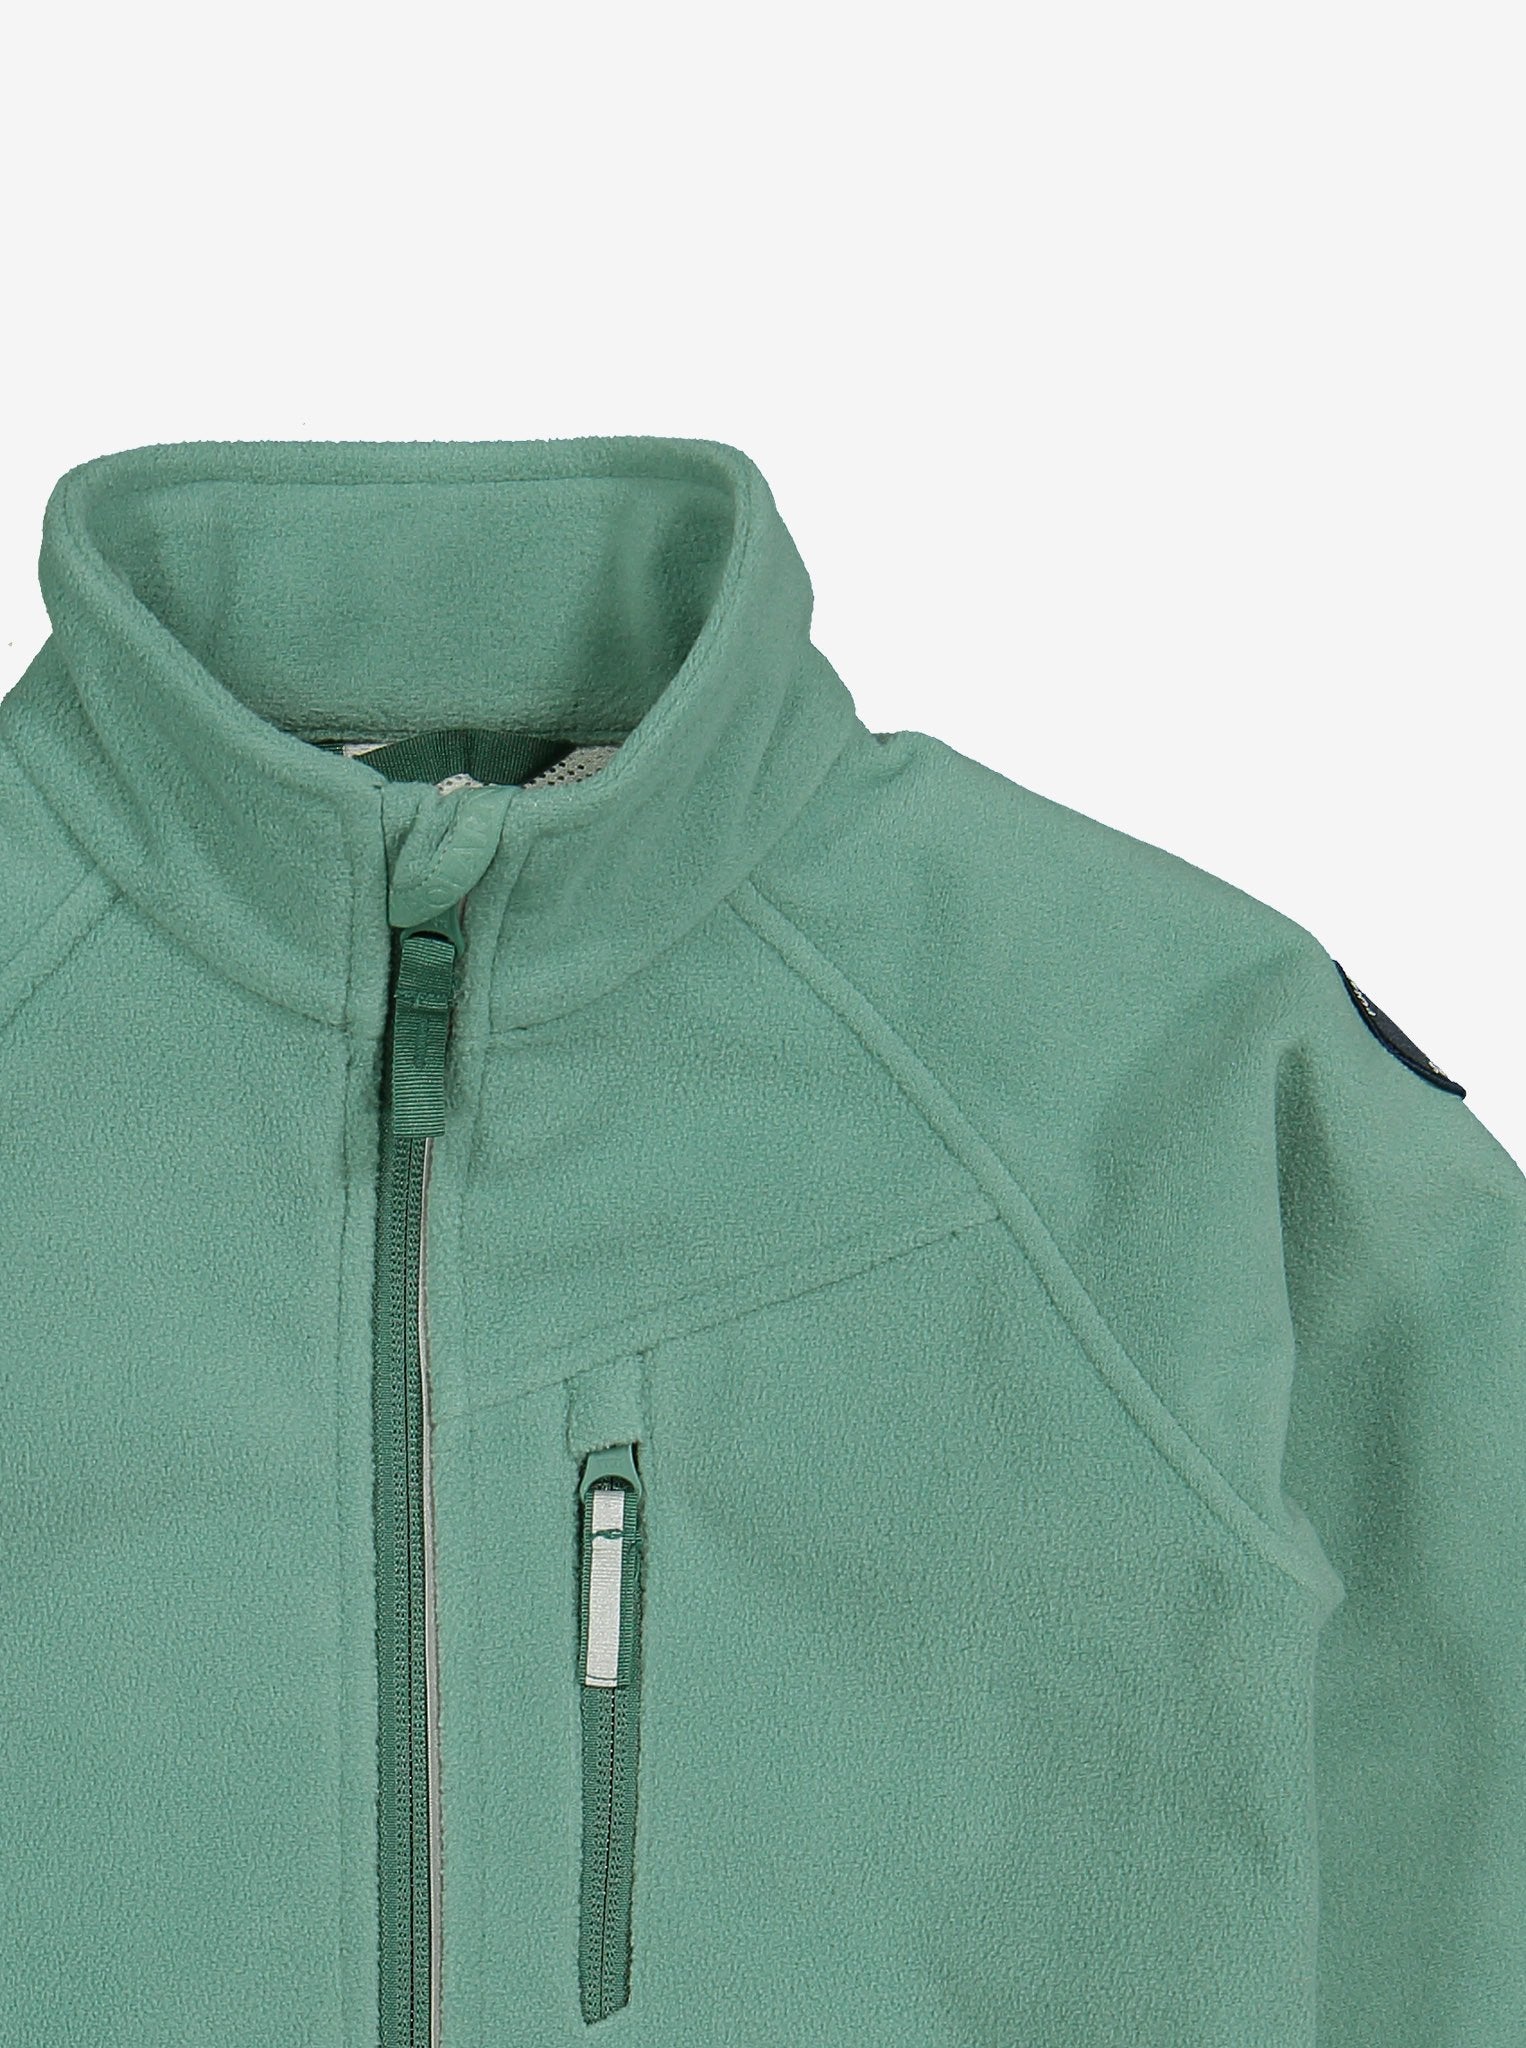 Close up shot of green, kids waterproof fleece jacket made of soft and flexible fabric, comes with reflector on zips and a front pocket.